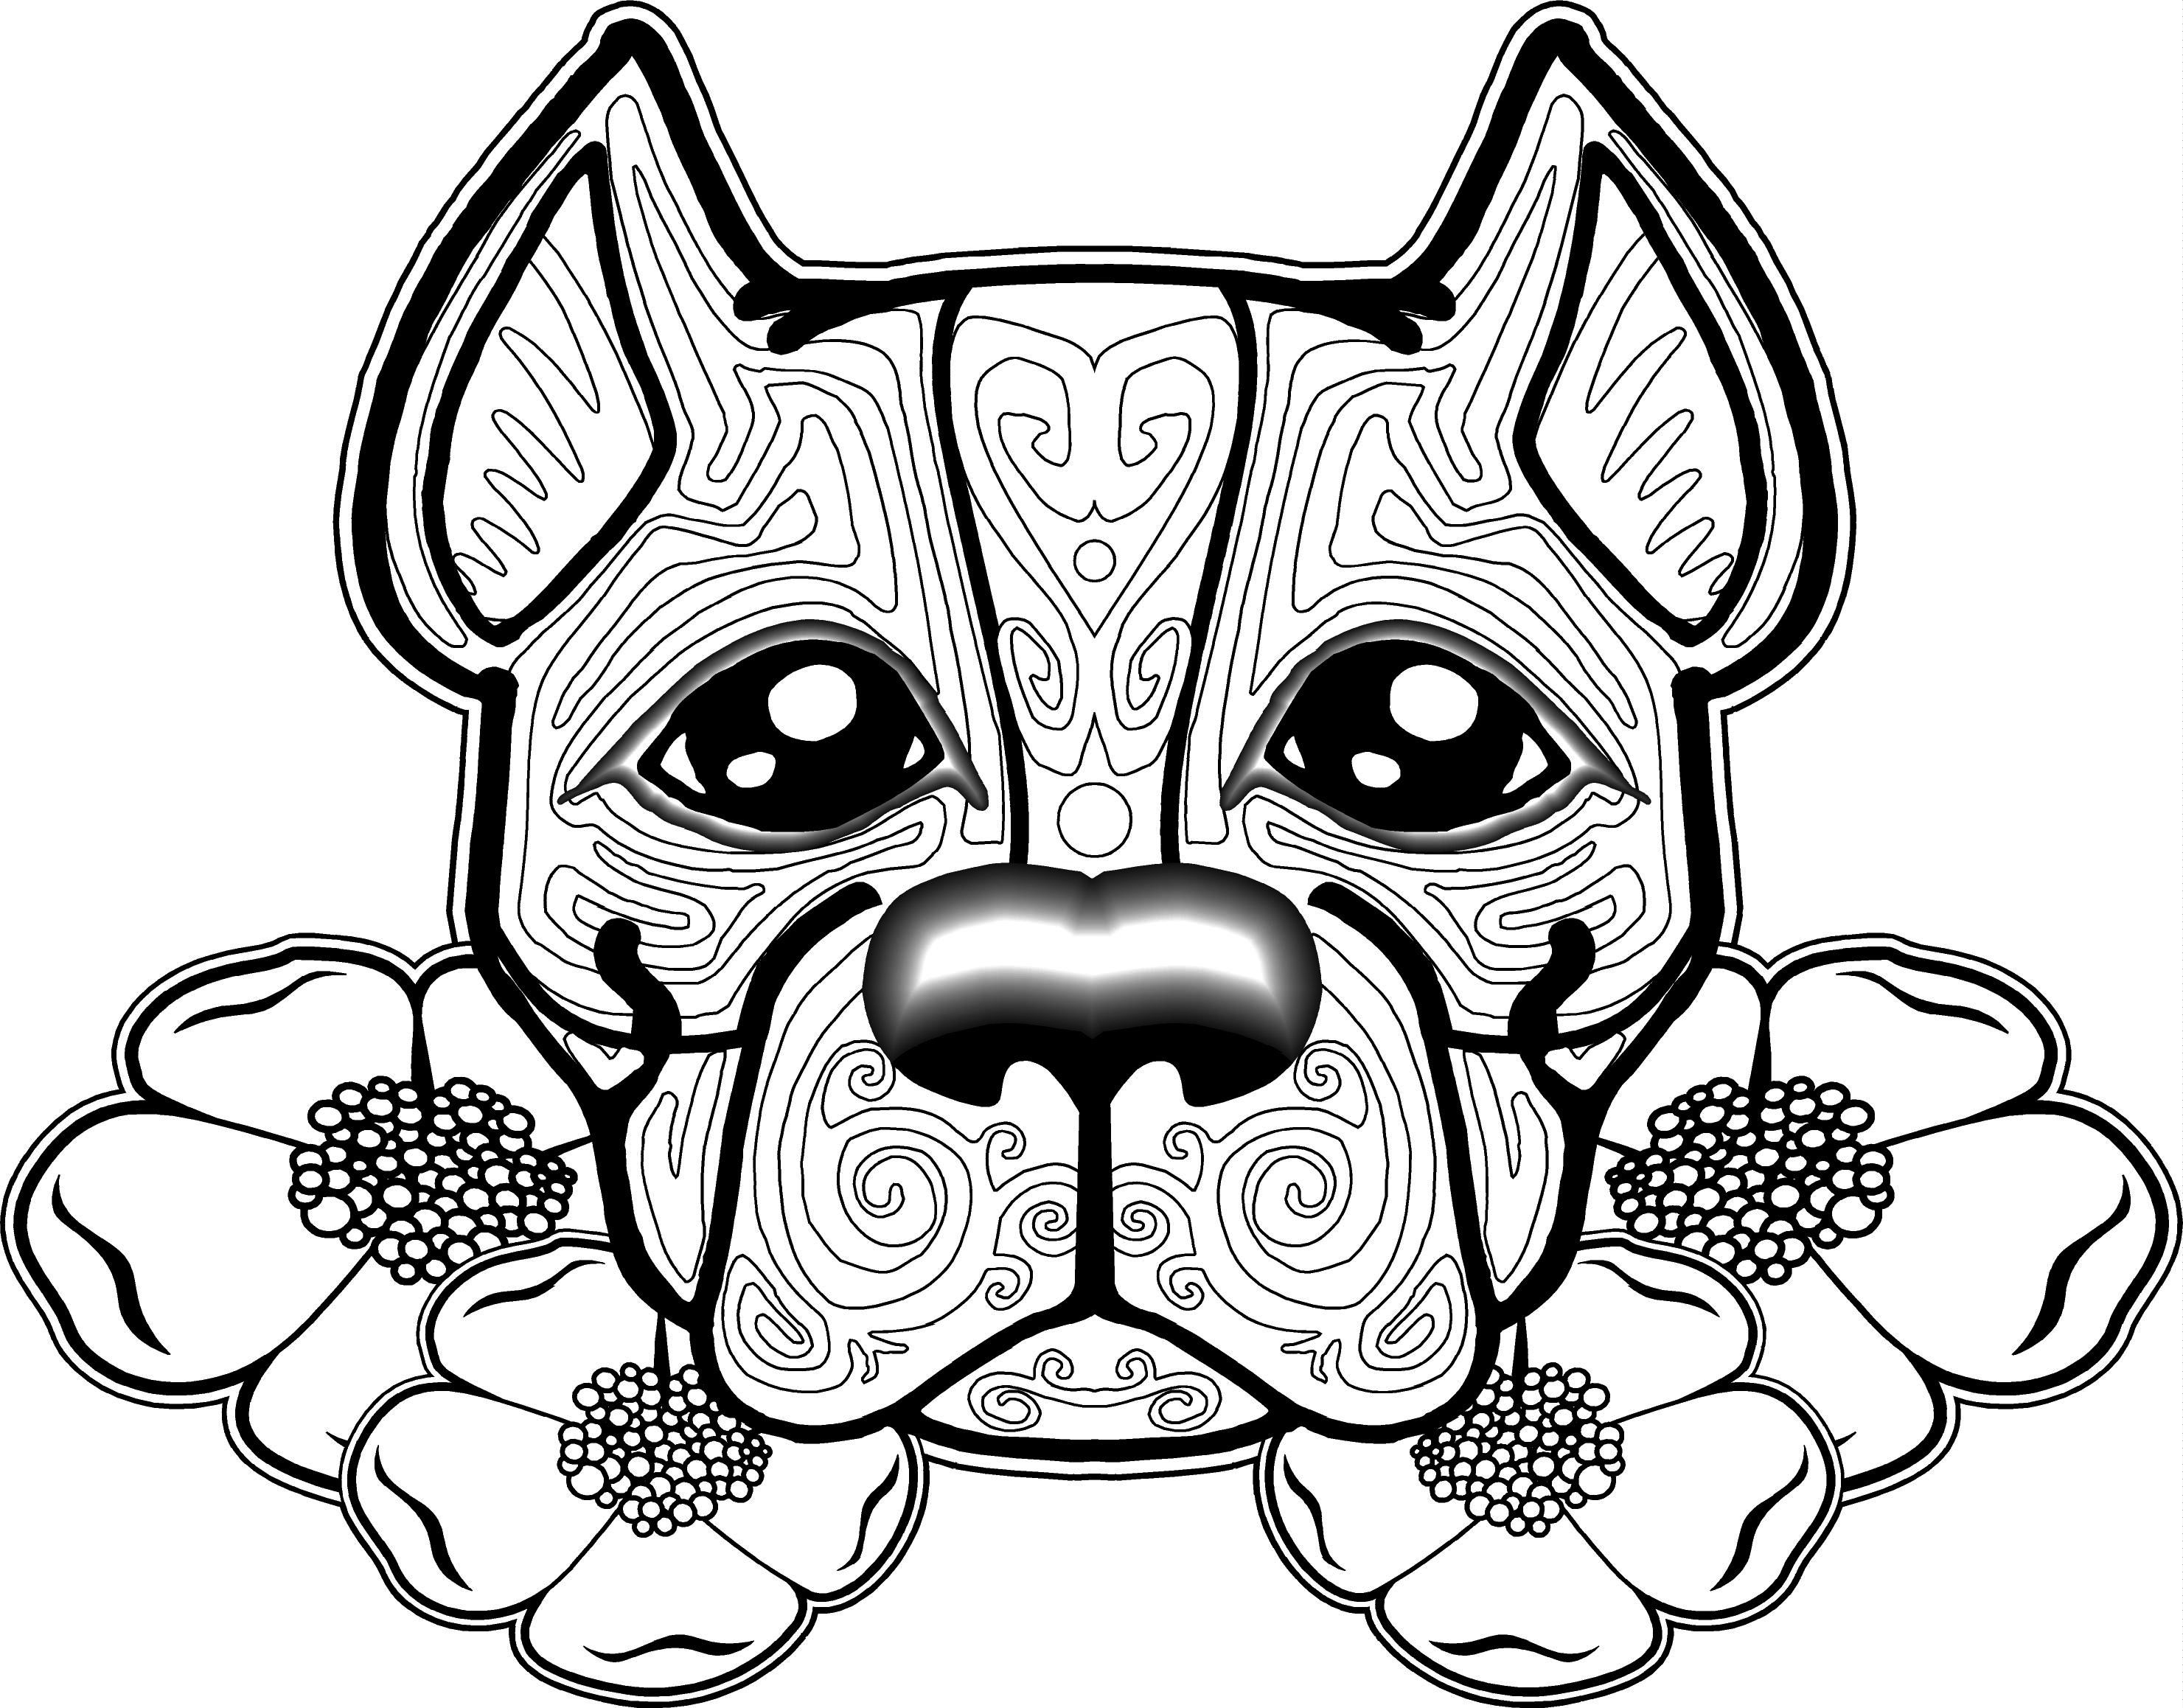 Free Dog Coloring Pages For Adults | Free Printable Coloring Pages - Colouring Pages Dogs Free Printable